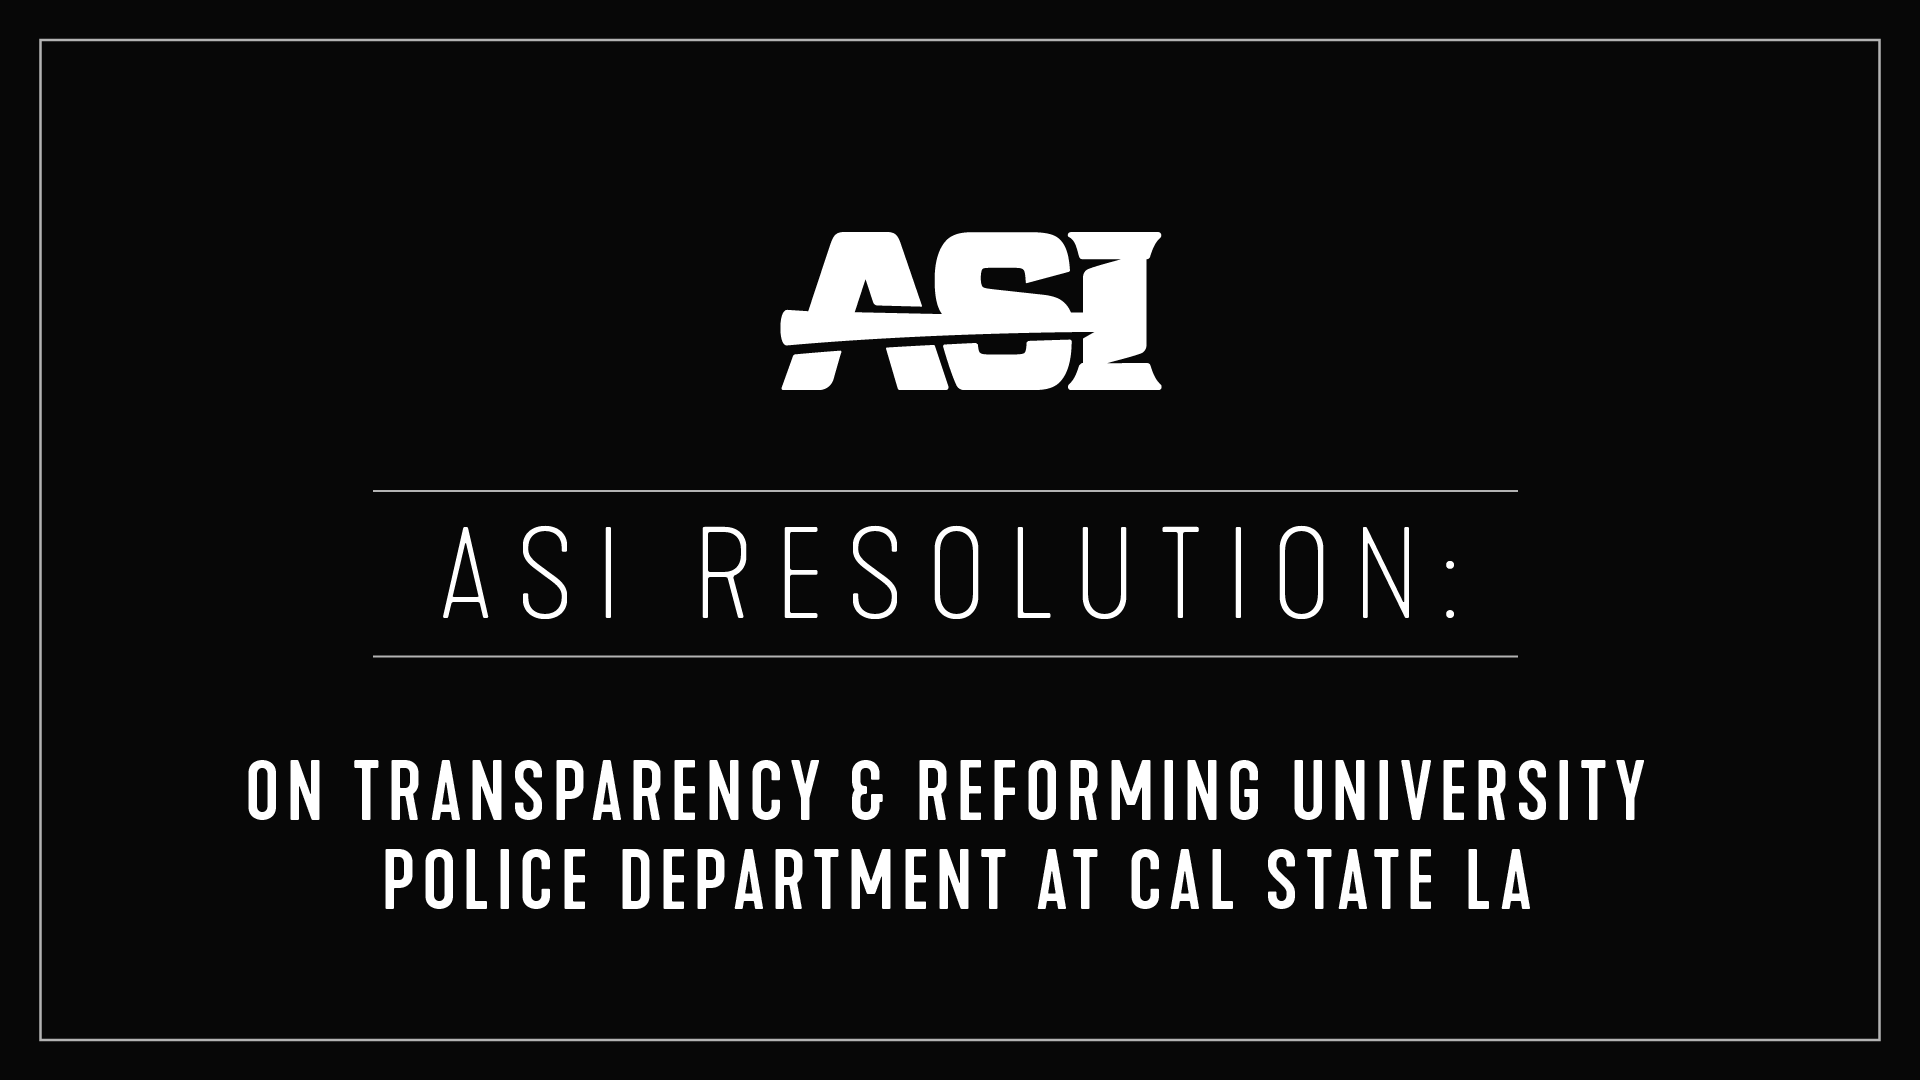 ASI Resolution: On Transparency & Reforming University Police Department at Cal State LA 